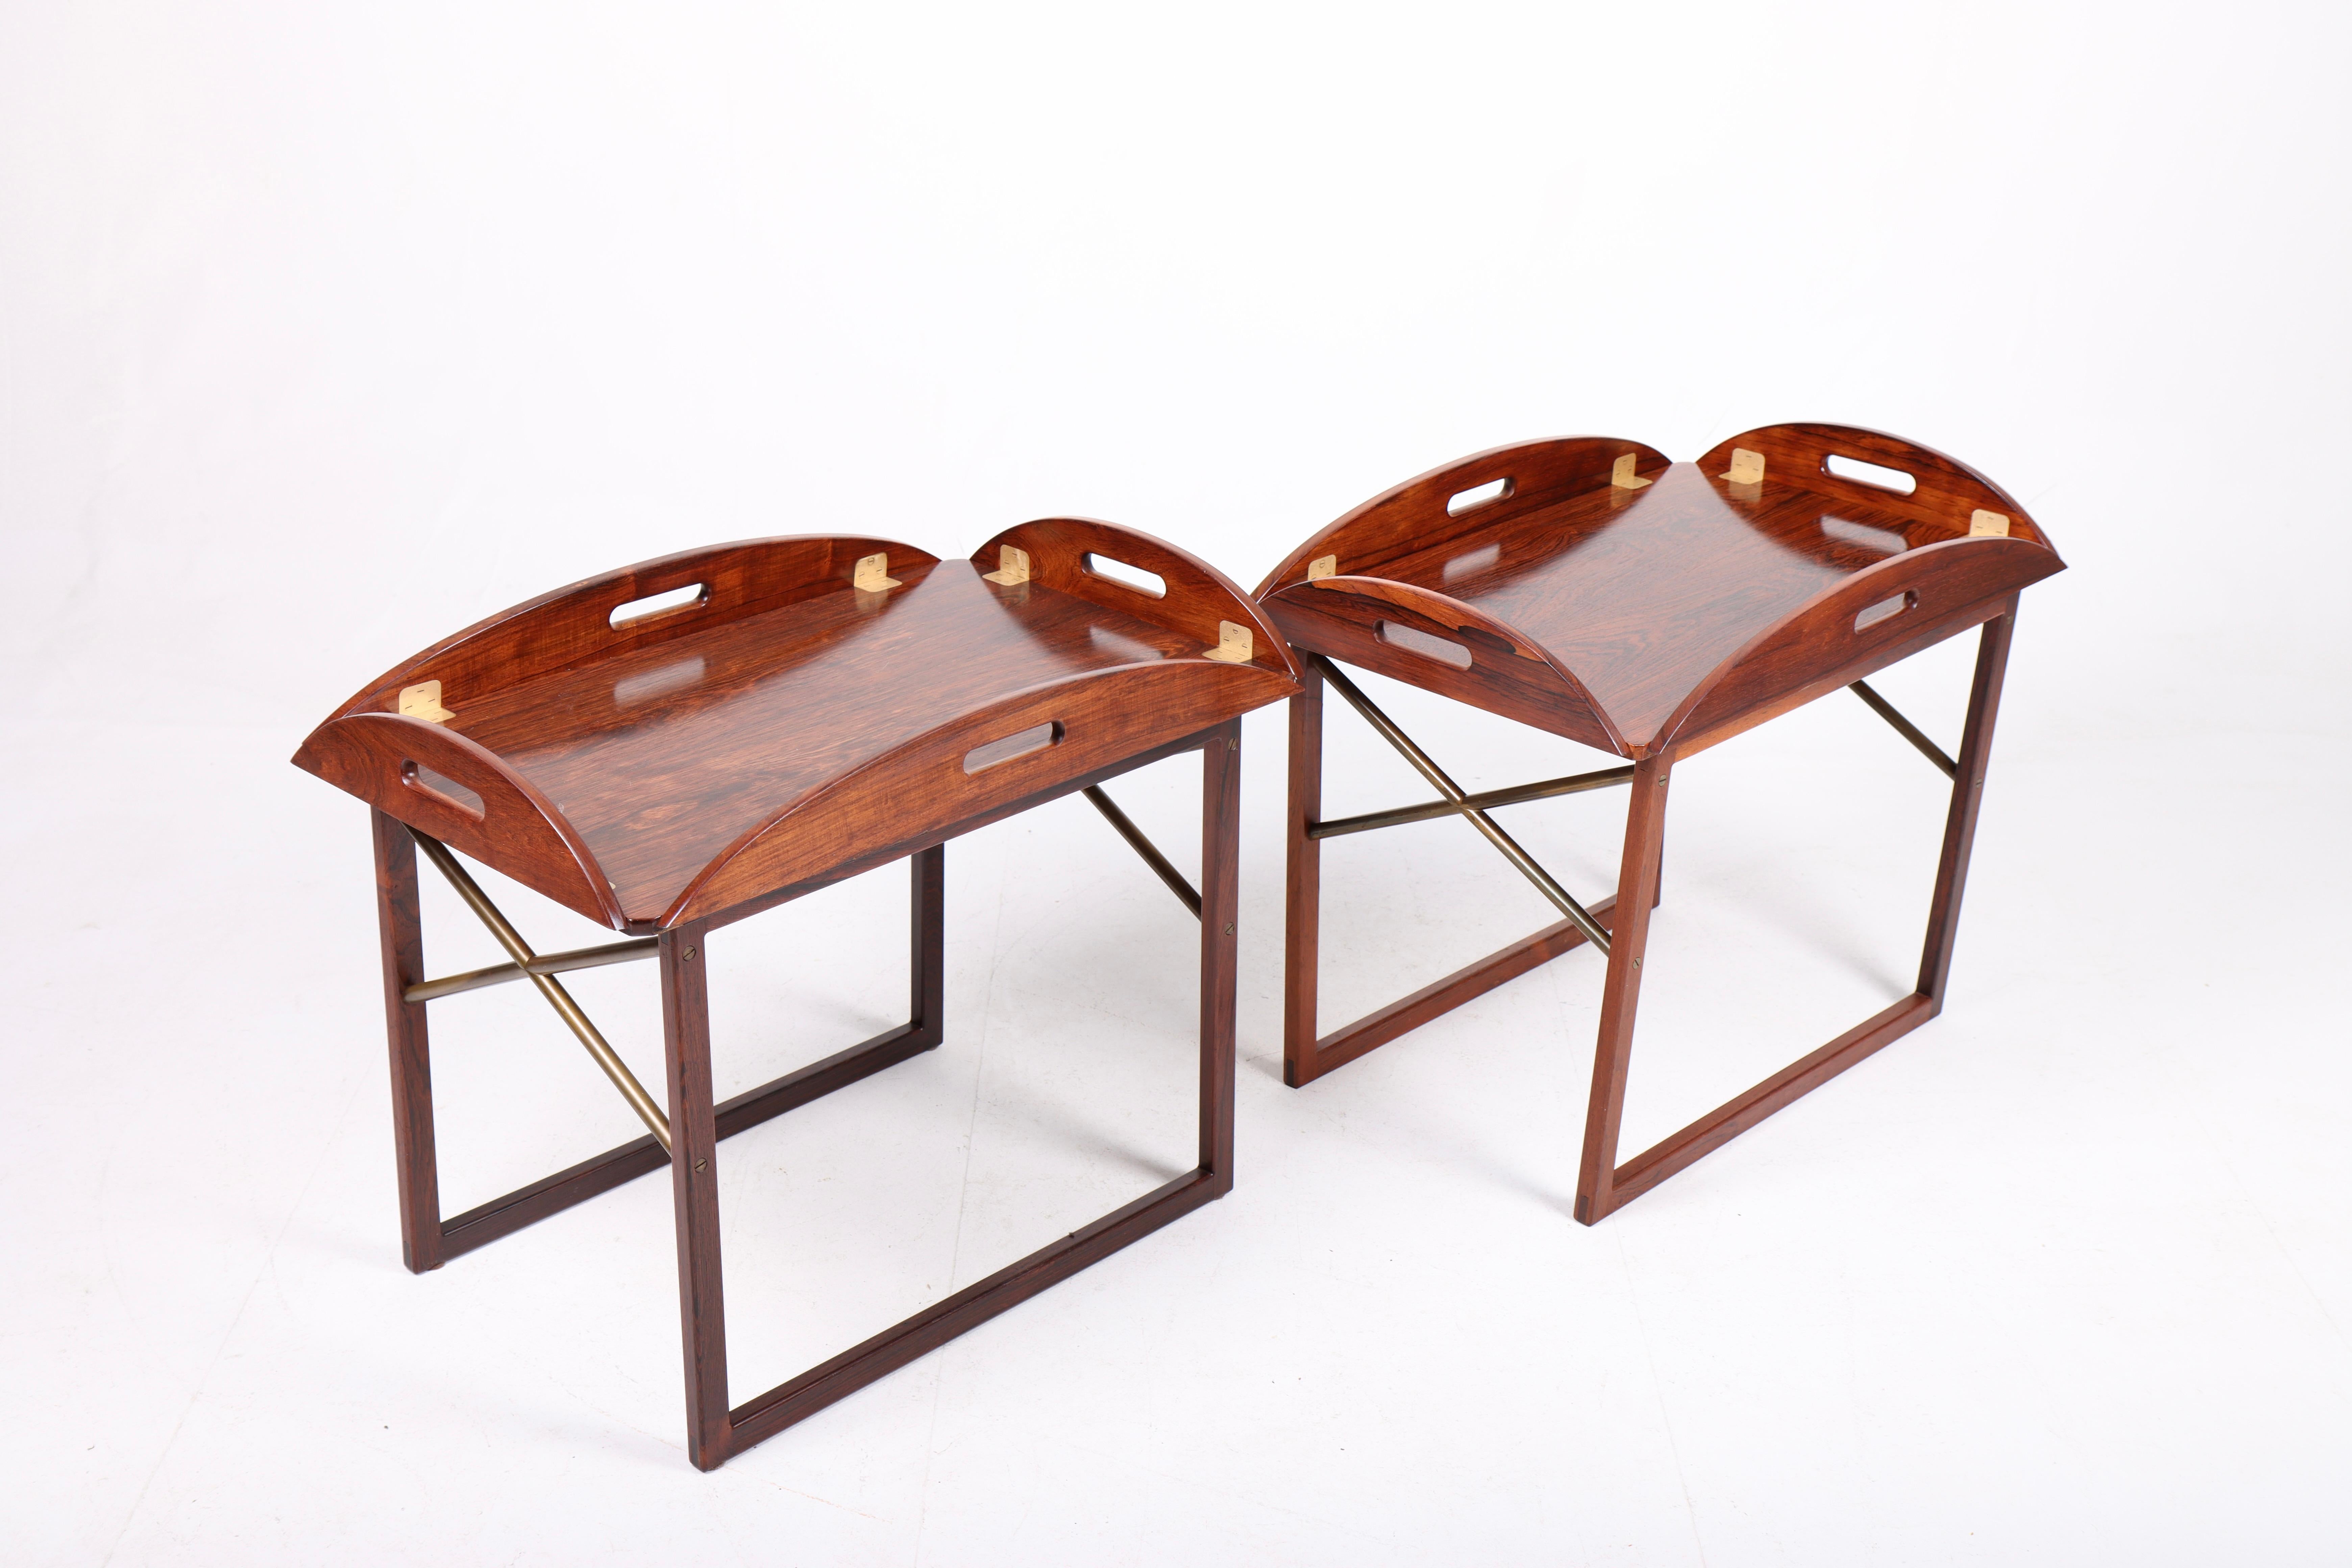 Pair of stunning end / tray tables in rosewood with brass hardware. Designed and made by Svend Langkilde of Denmark in the 1960s. Great original condition.